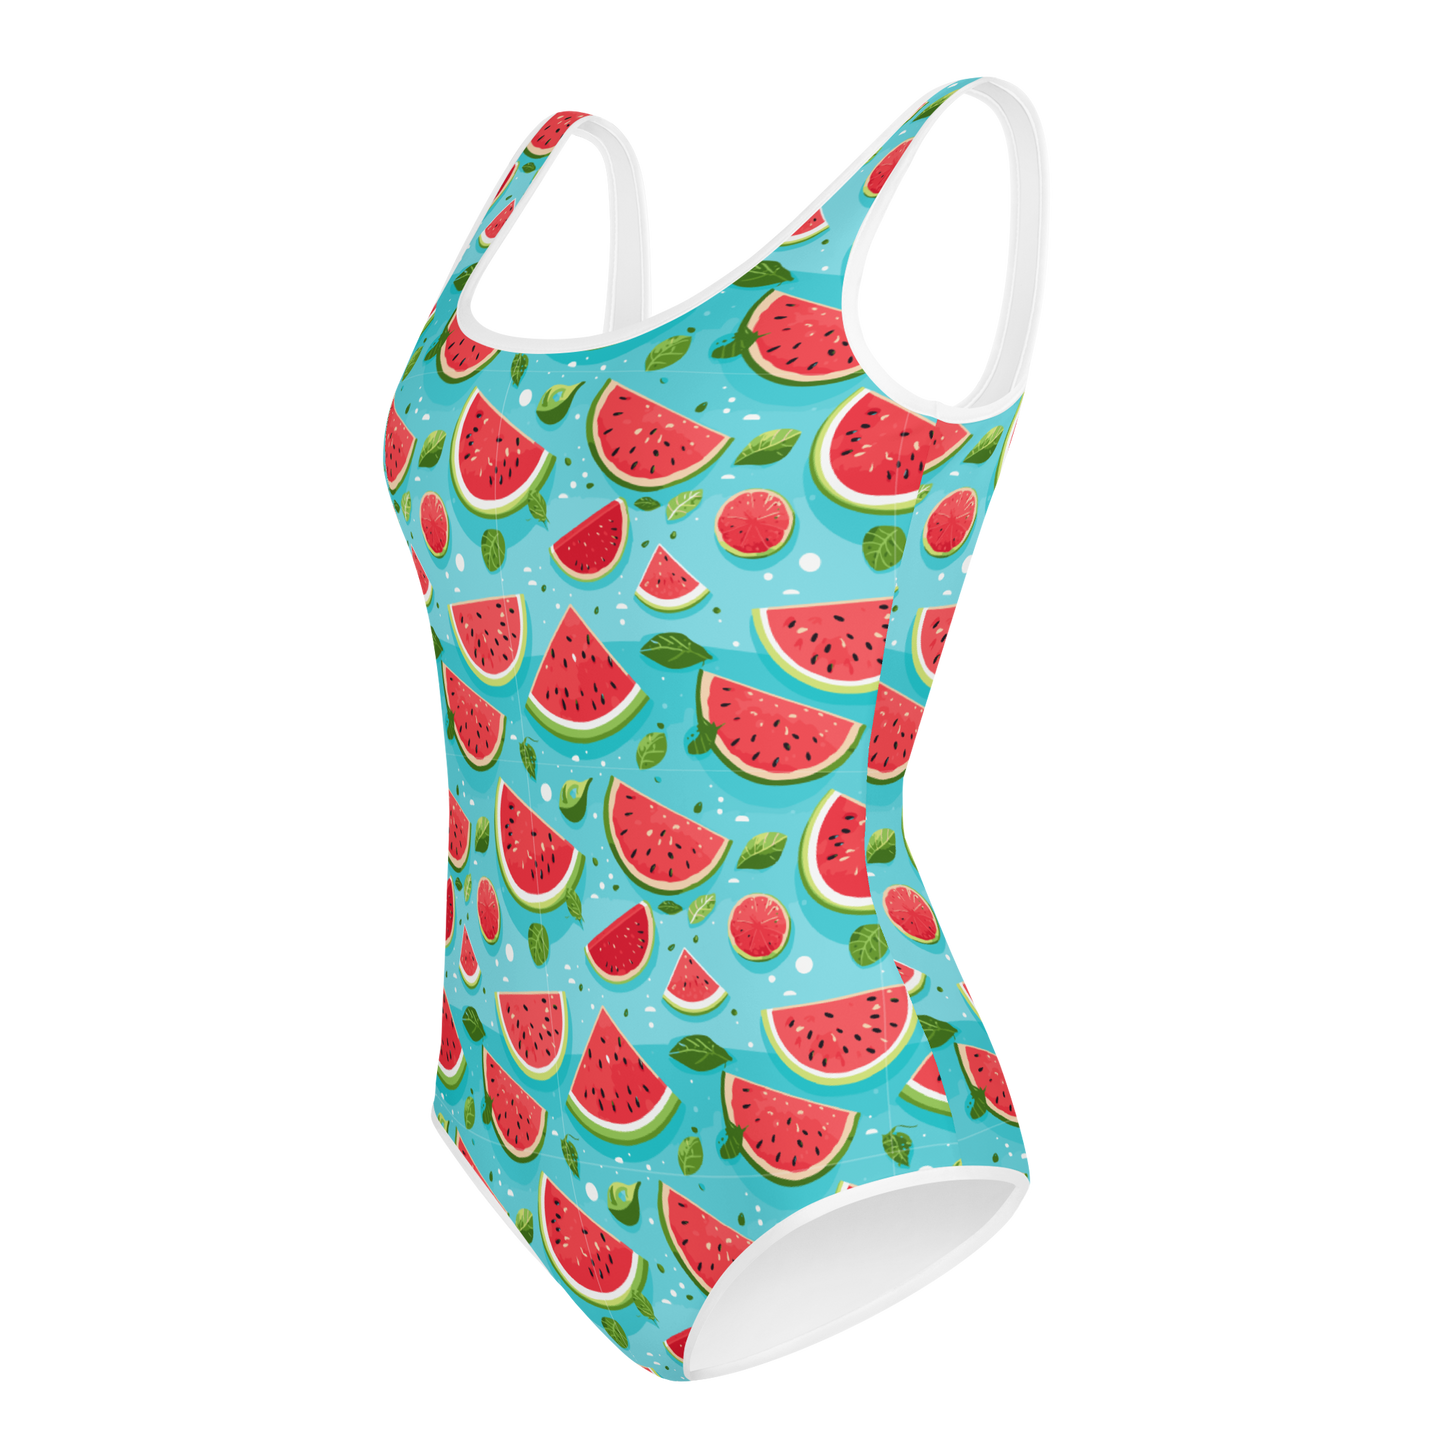 Watermelon Vibes: Youth Swimsuit for Beach or Pool